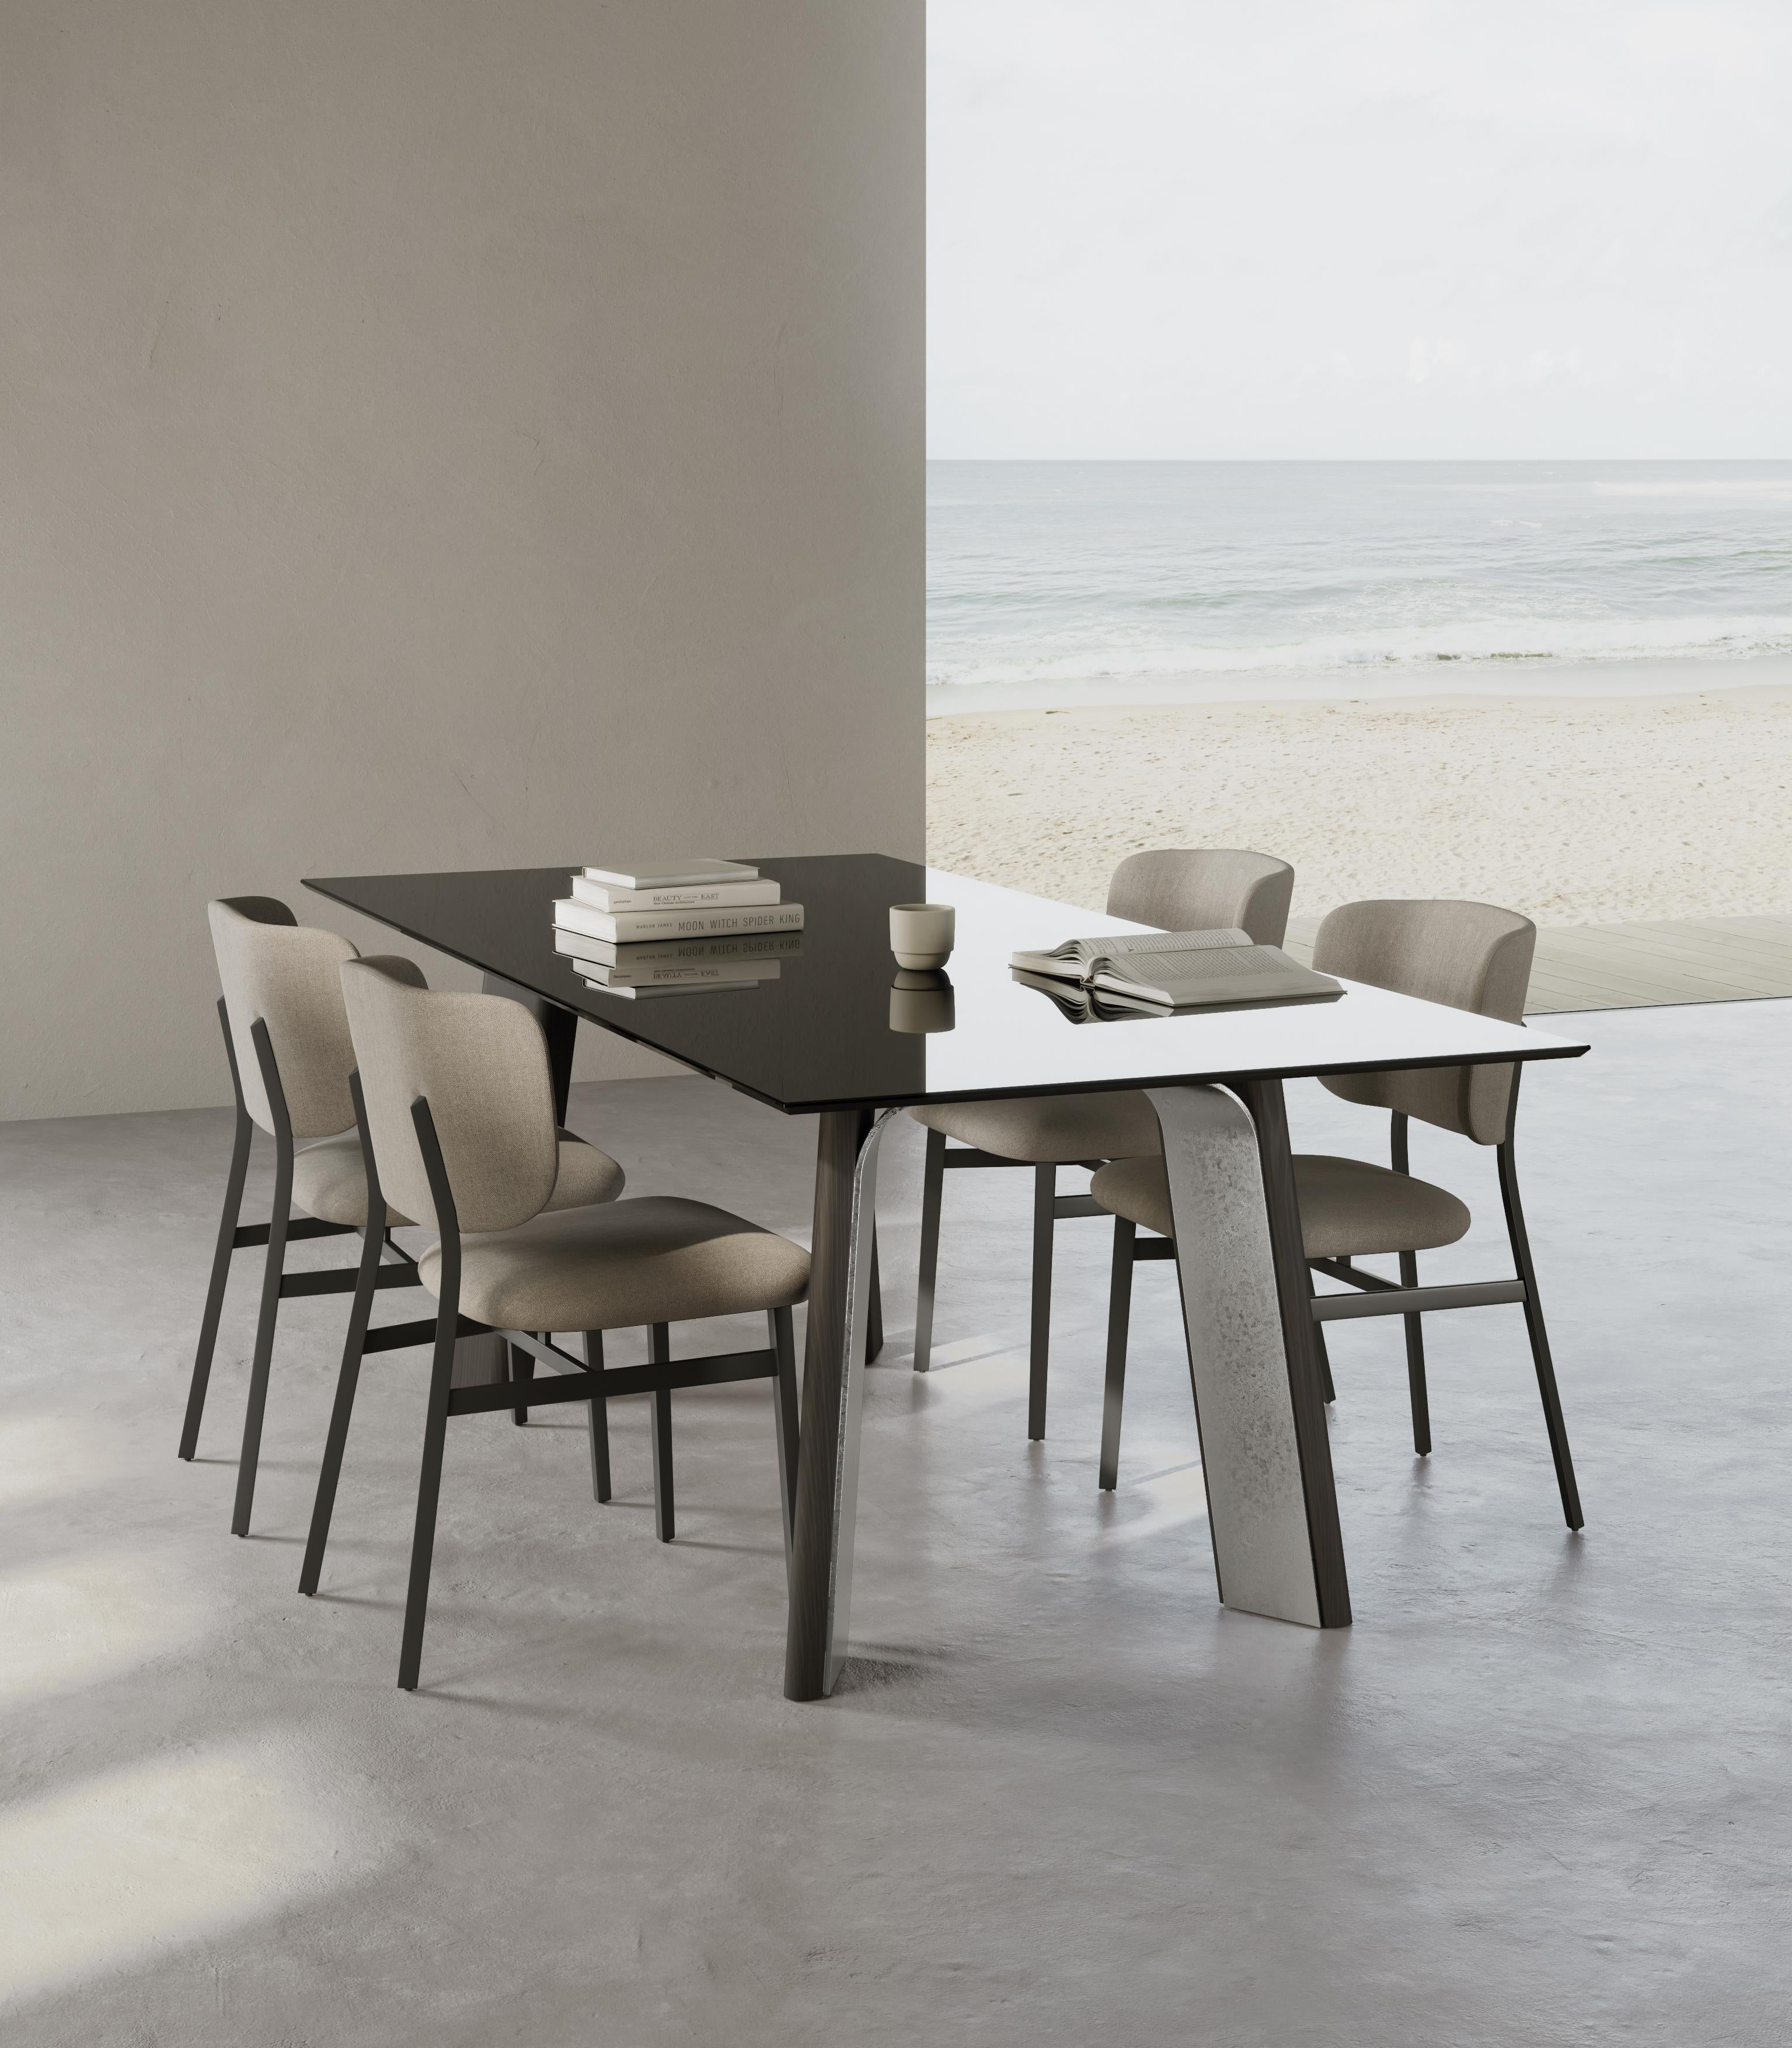 Afrodite Dining Table by Chinellato Design
Dimensions: W 200 / 220 / 250 x D 100 / 120 x H 72.2 cm
Materials: 
Top:  Smooth Smoked Tempered Glass
Base: Smoked Grey Oak / Silver Chabin


Chinellato has been operating in furnishing since 1969. In that